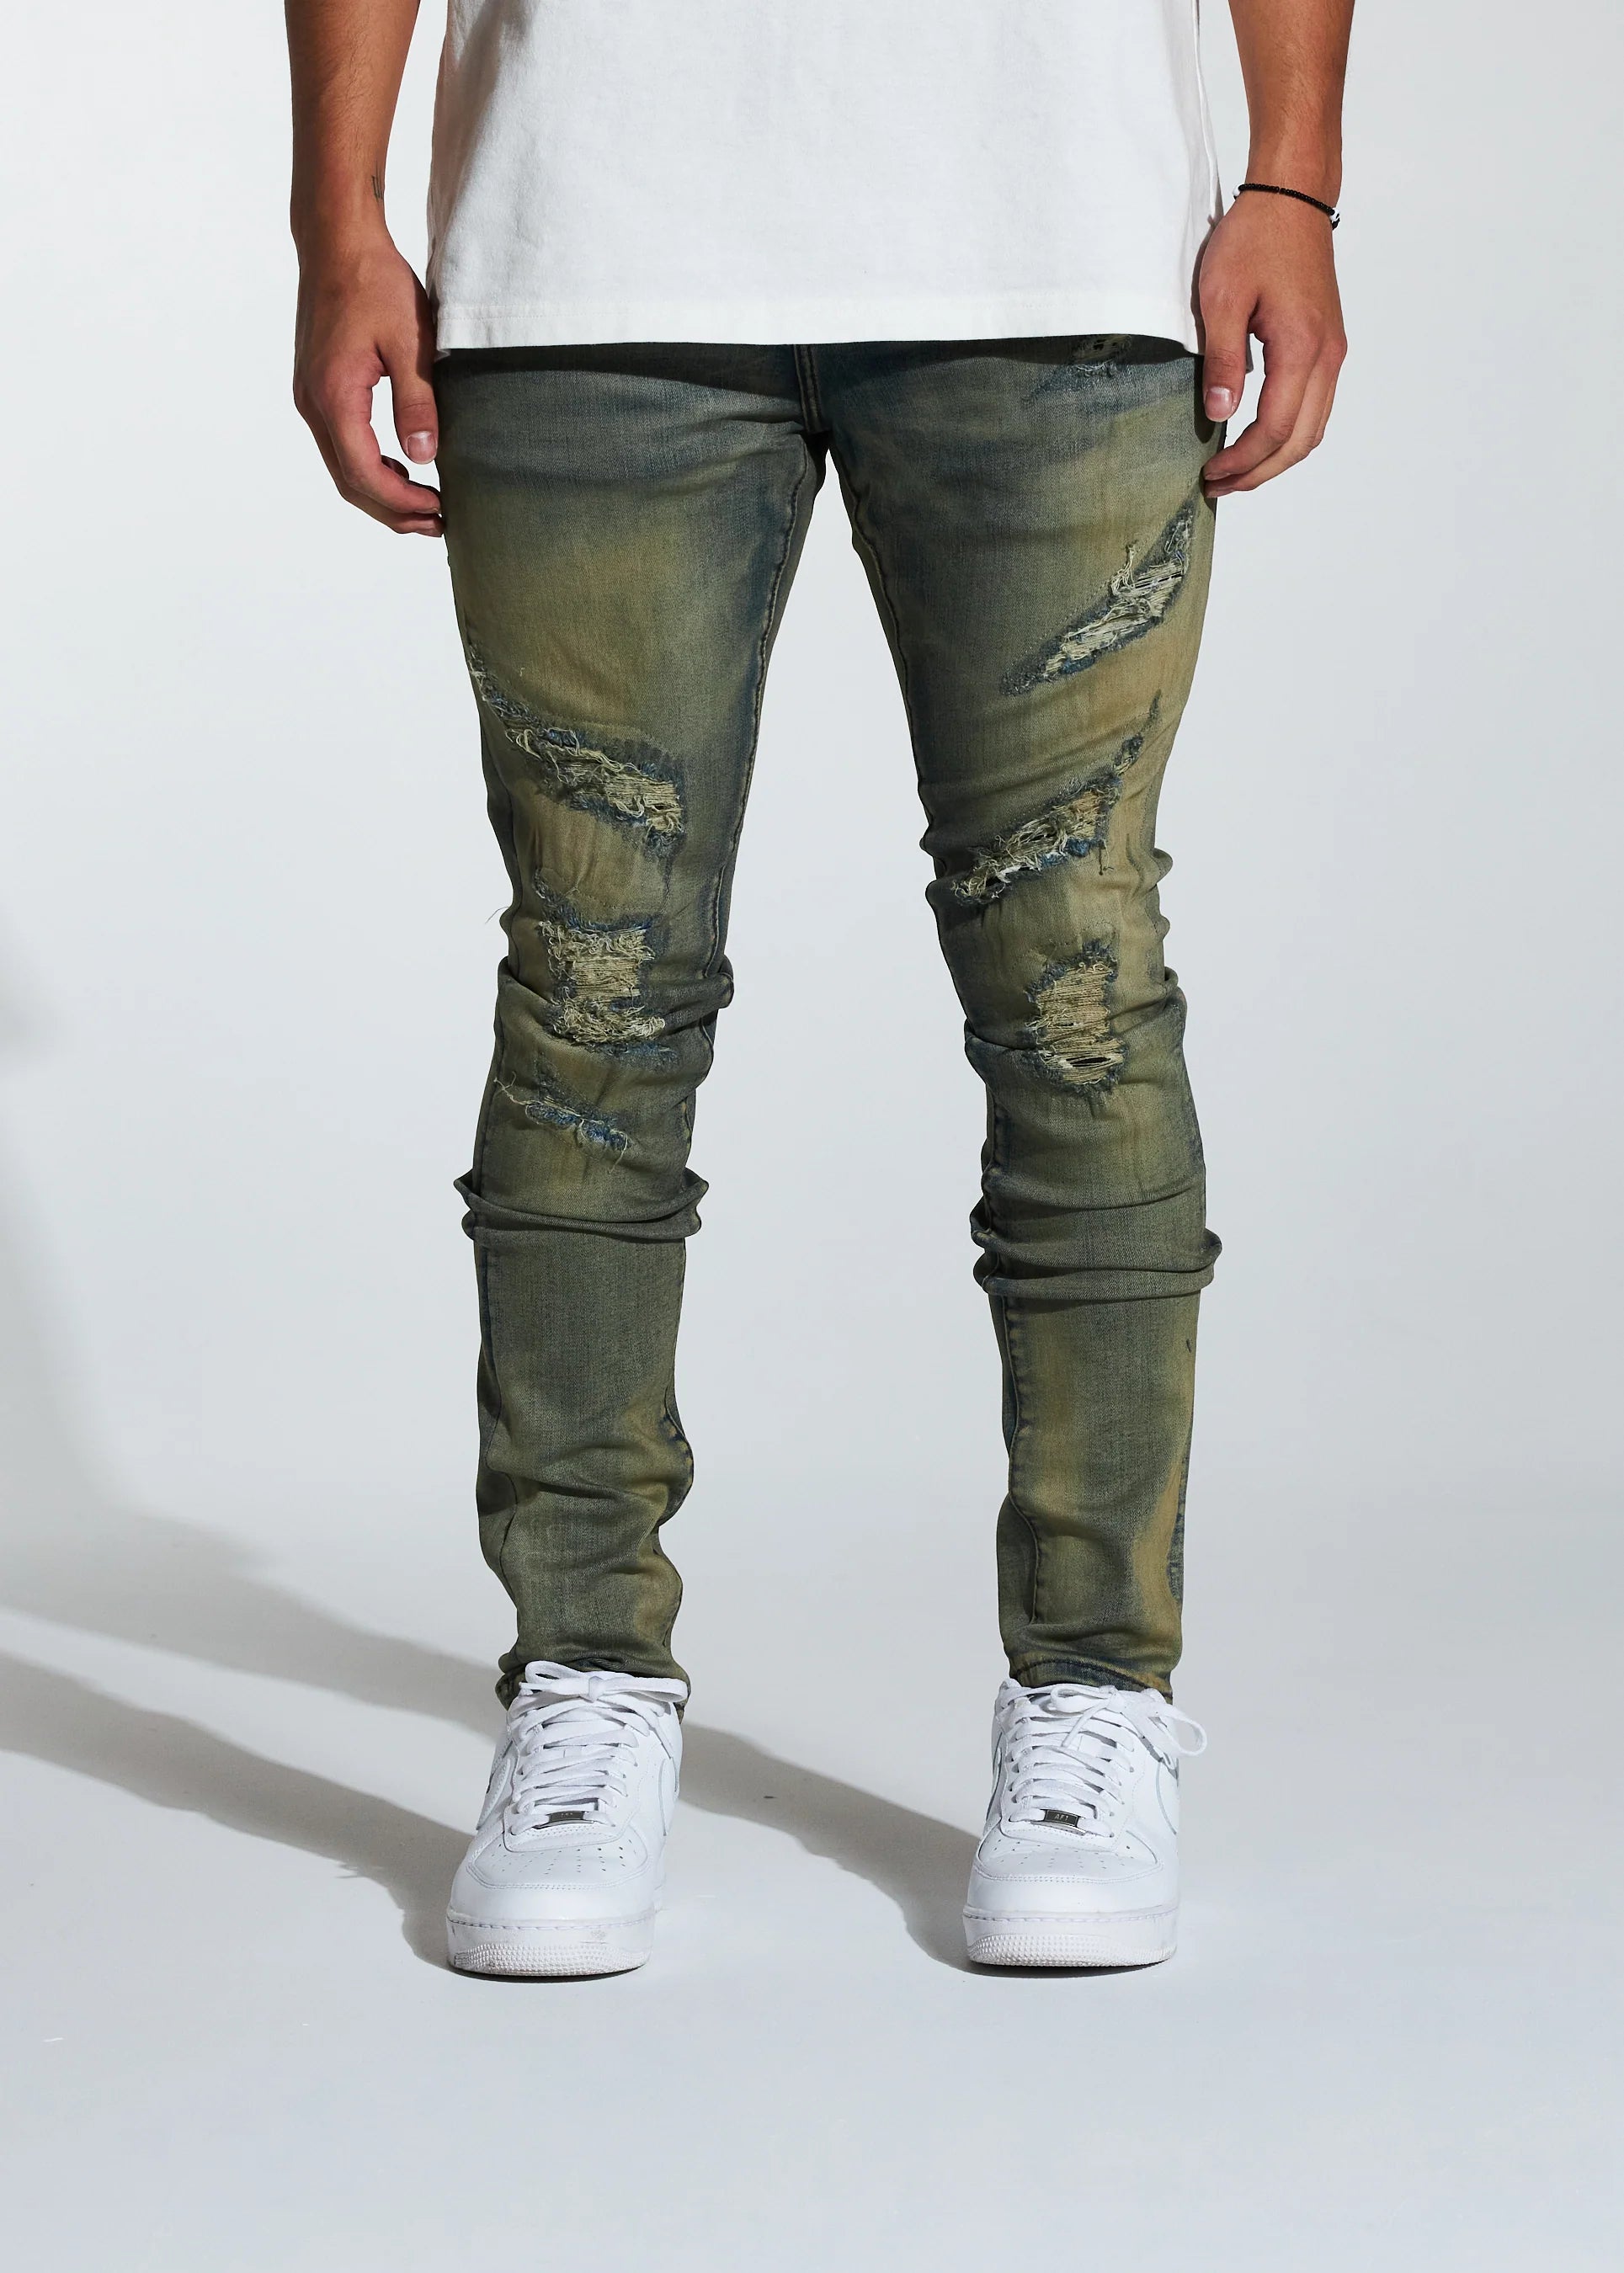 CRYSP DENIM DISTRESSED JEANS WITH PATCHES SAND - CRYSPF123-19